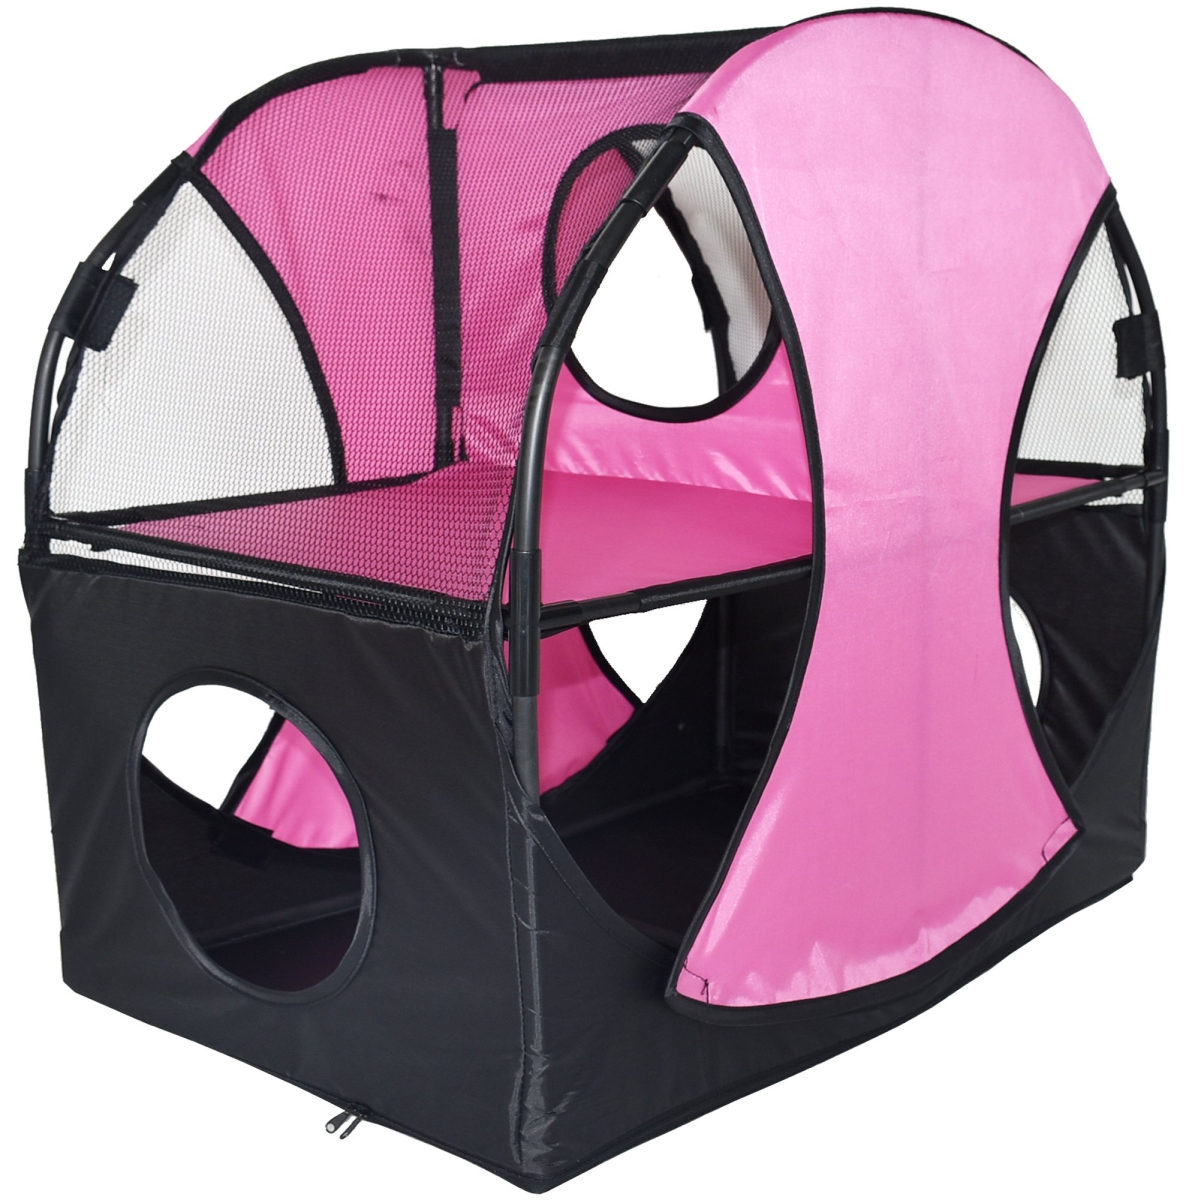 Picture of Pet Life PTT7PKBK Kitty Play Pet Cat House, Pink & Black - One Size